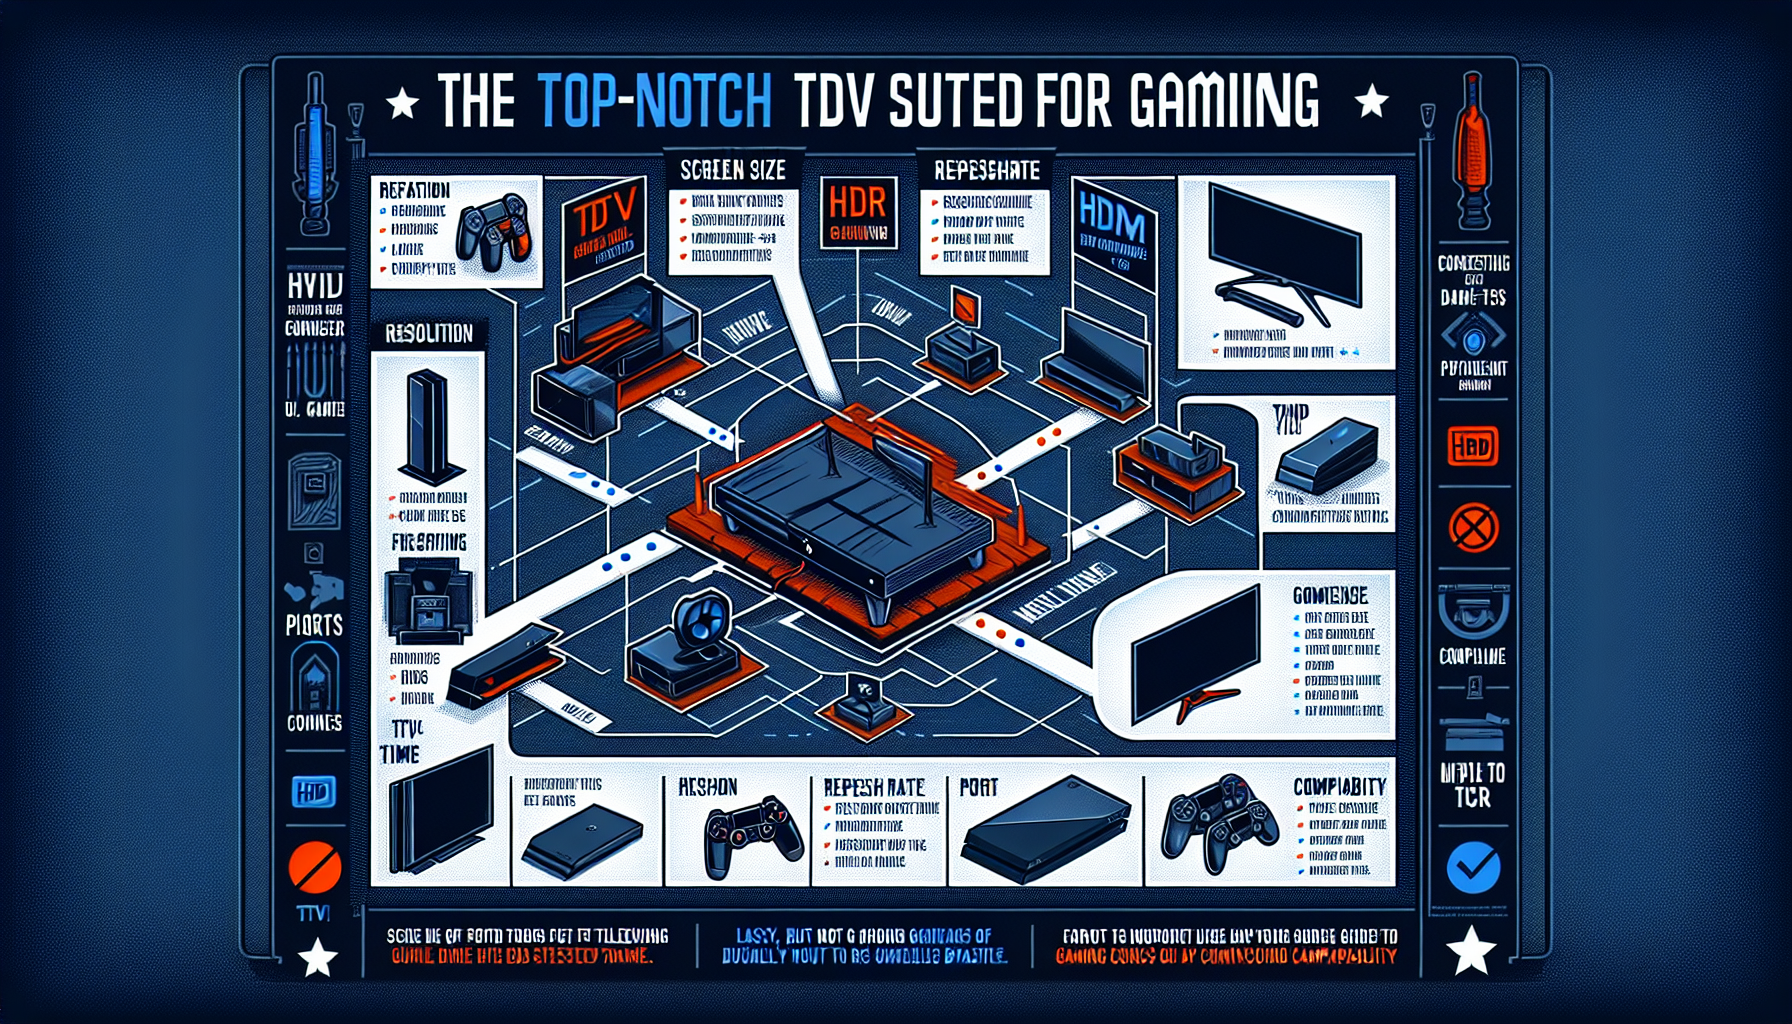 Guide to Choosing the Top Gaming Television Currently on the Market